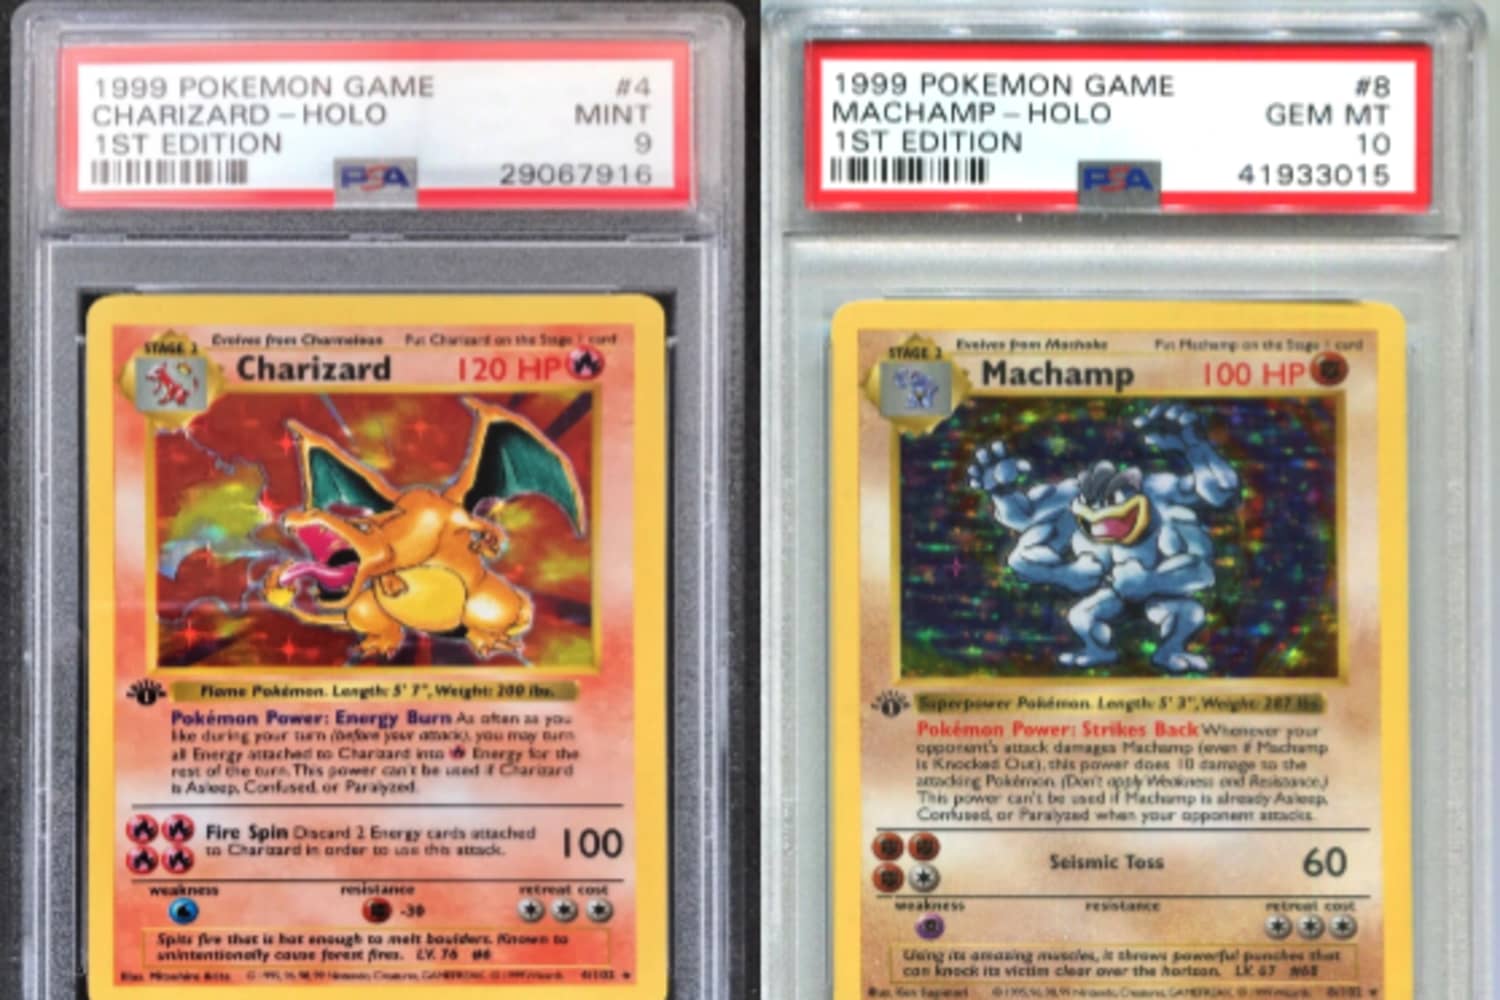 Your Old Pokémon Cards Could Be Worth Up to $12,500.